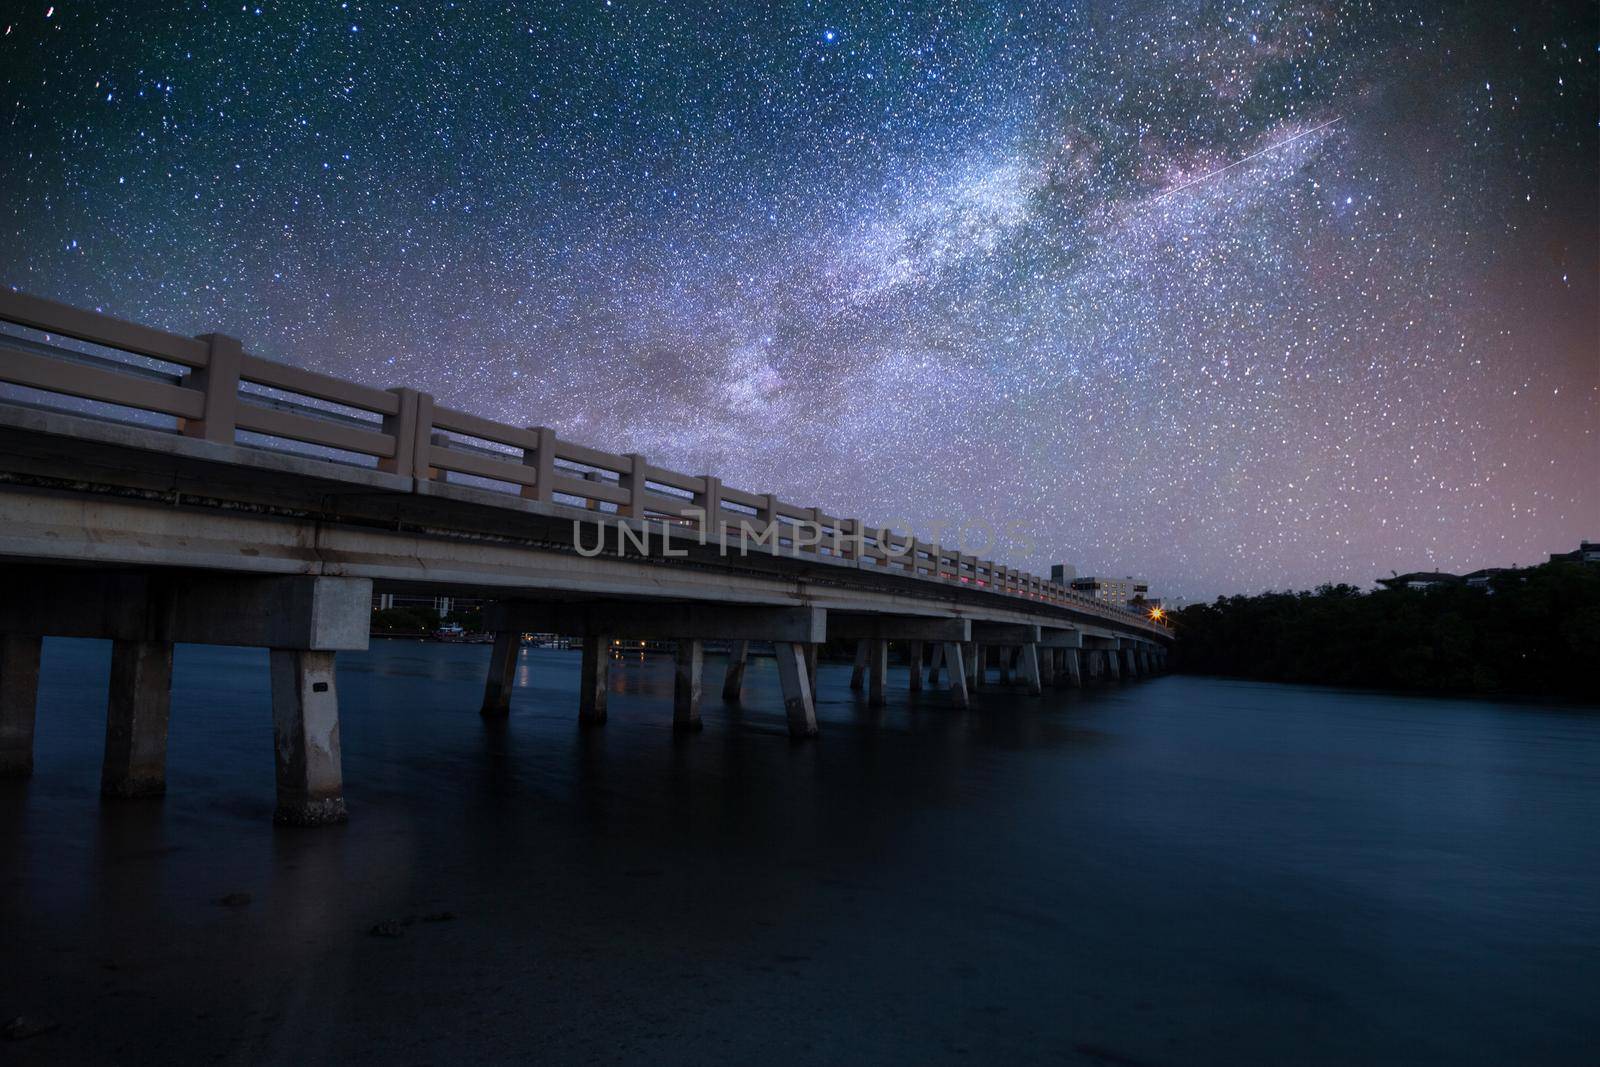 Night sky over bridge over Hickory Pass leading to the ocean in Bonita Springs, Florida.